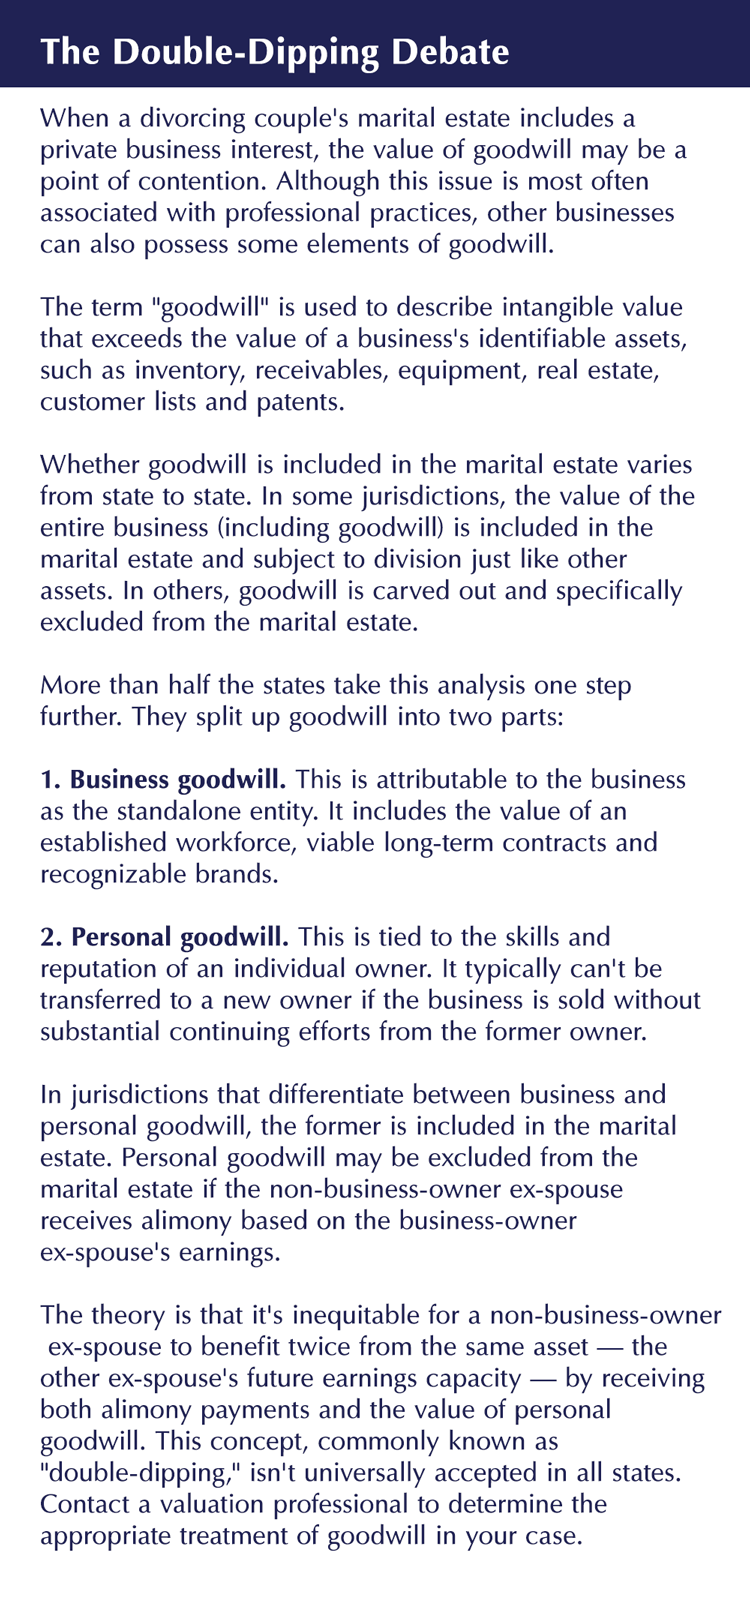 The trade-off between receiving personal goodwill and alimony payments - the divorce double dipping rule